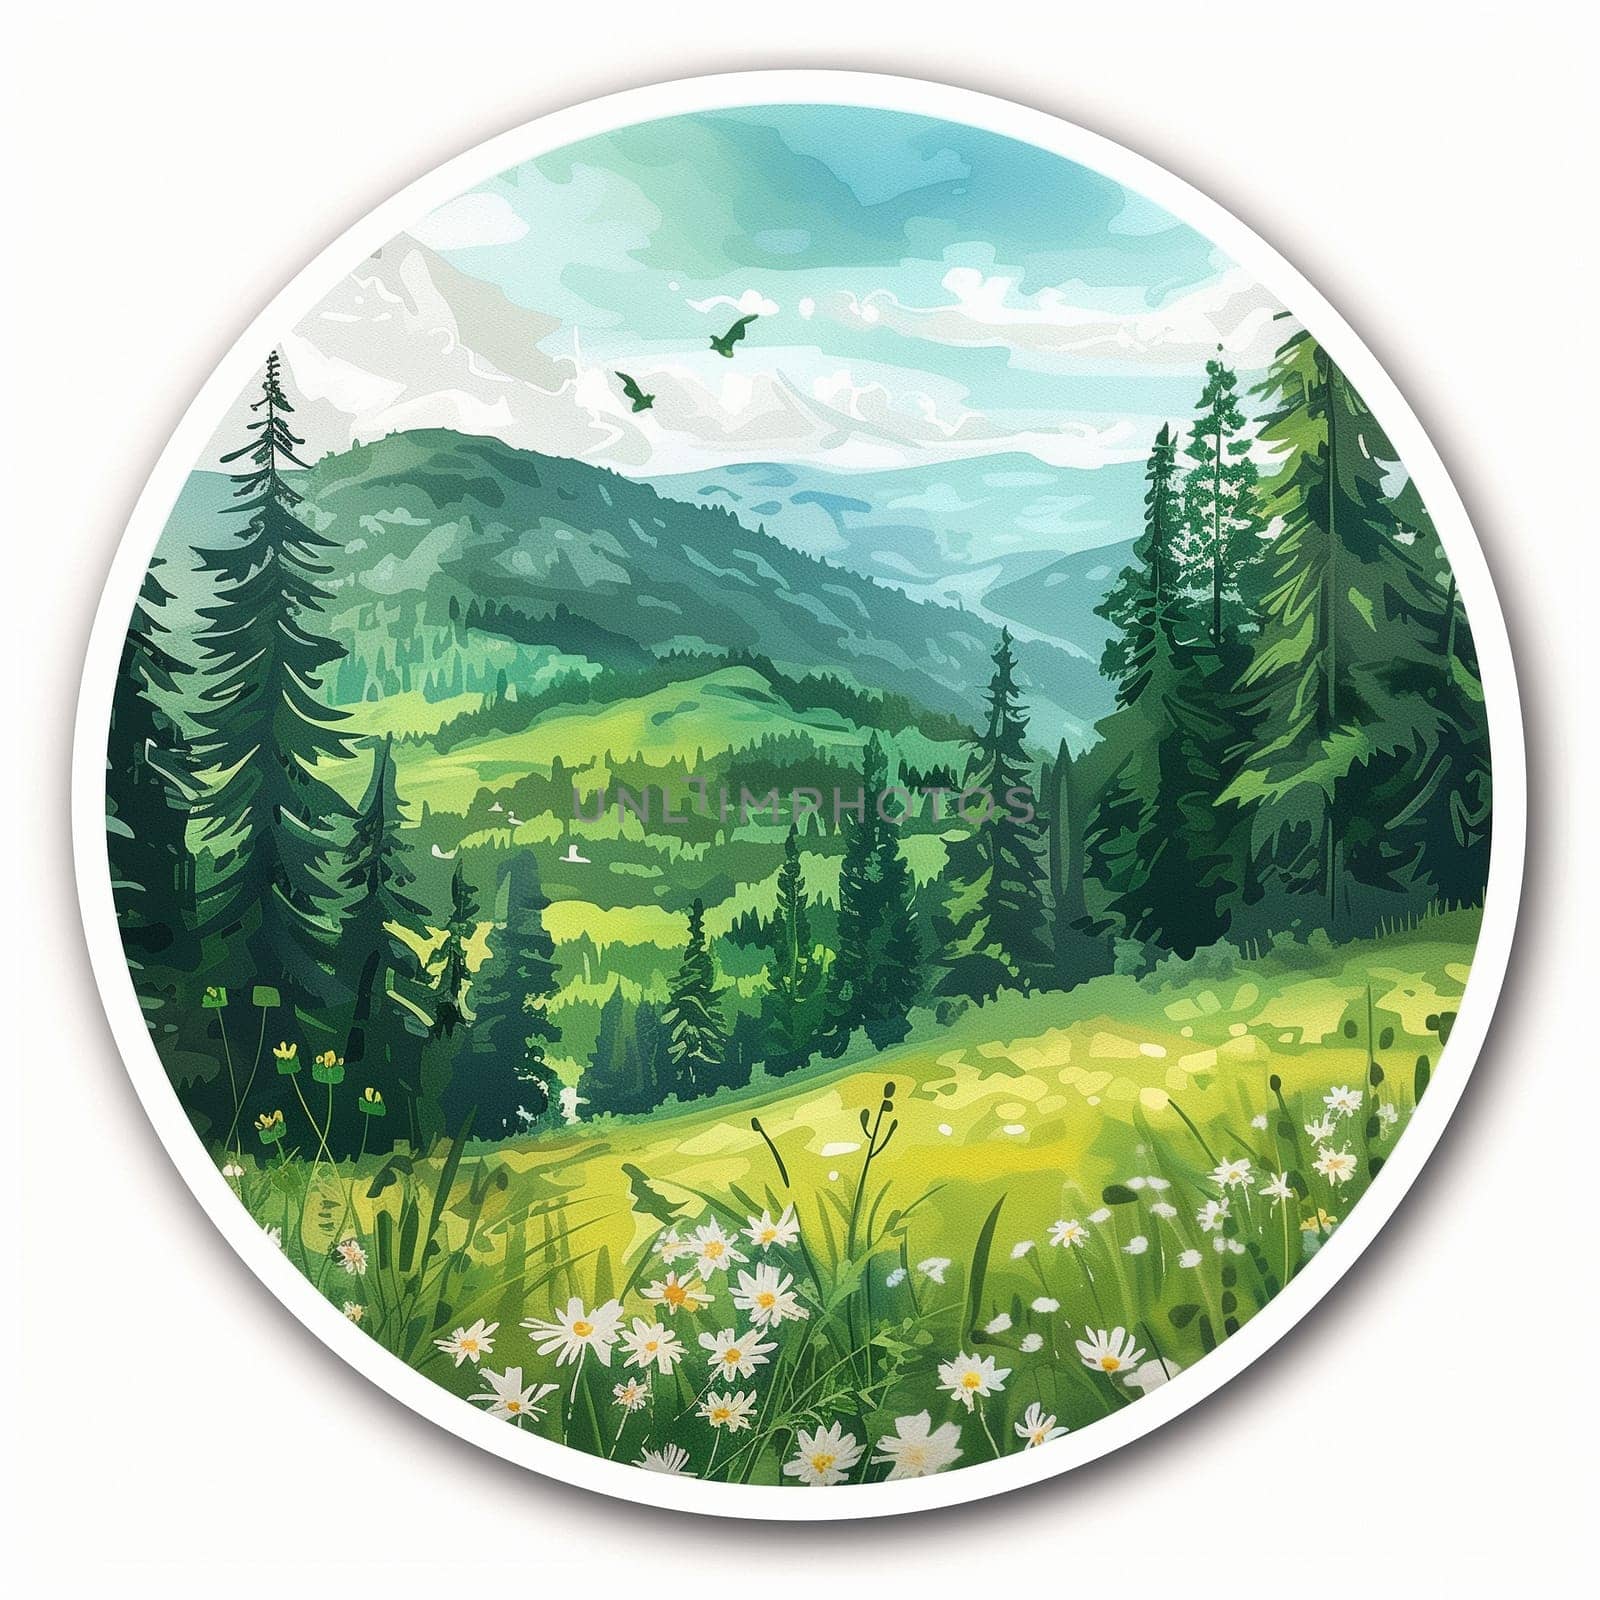 Summer stickers with forest, field, sky and hiking by NeuroSky